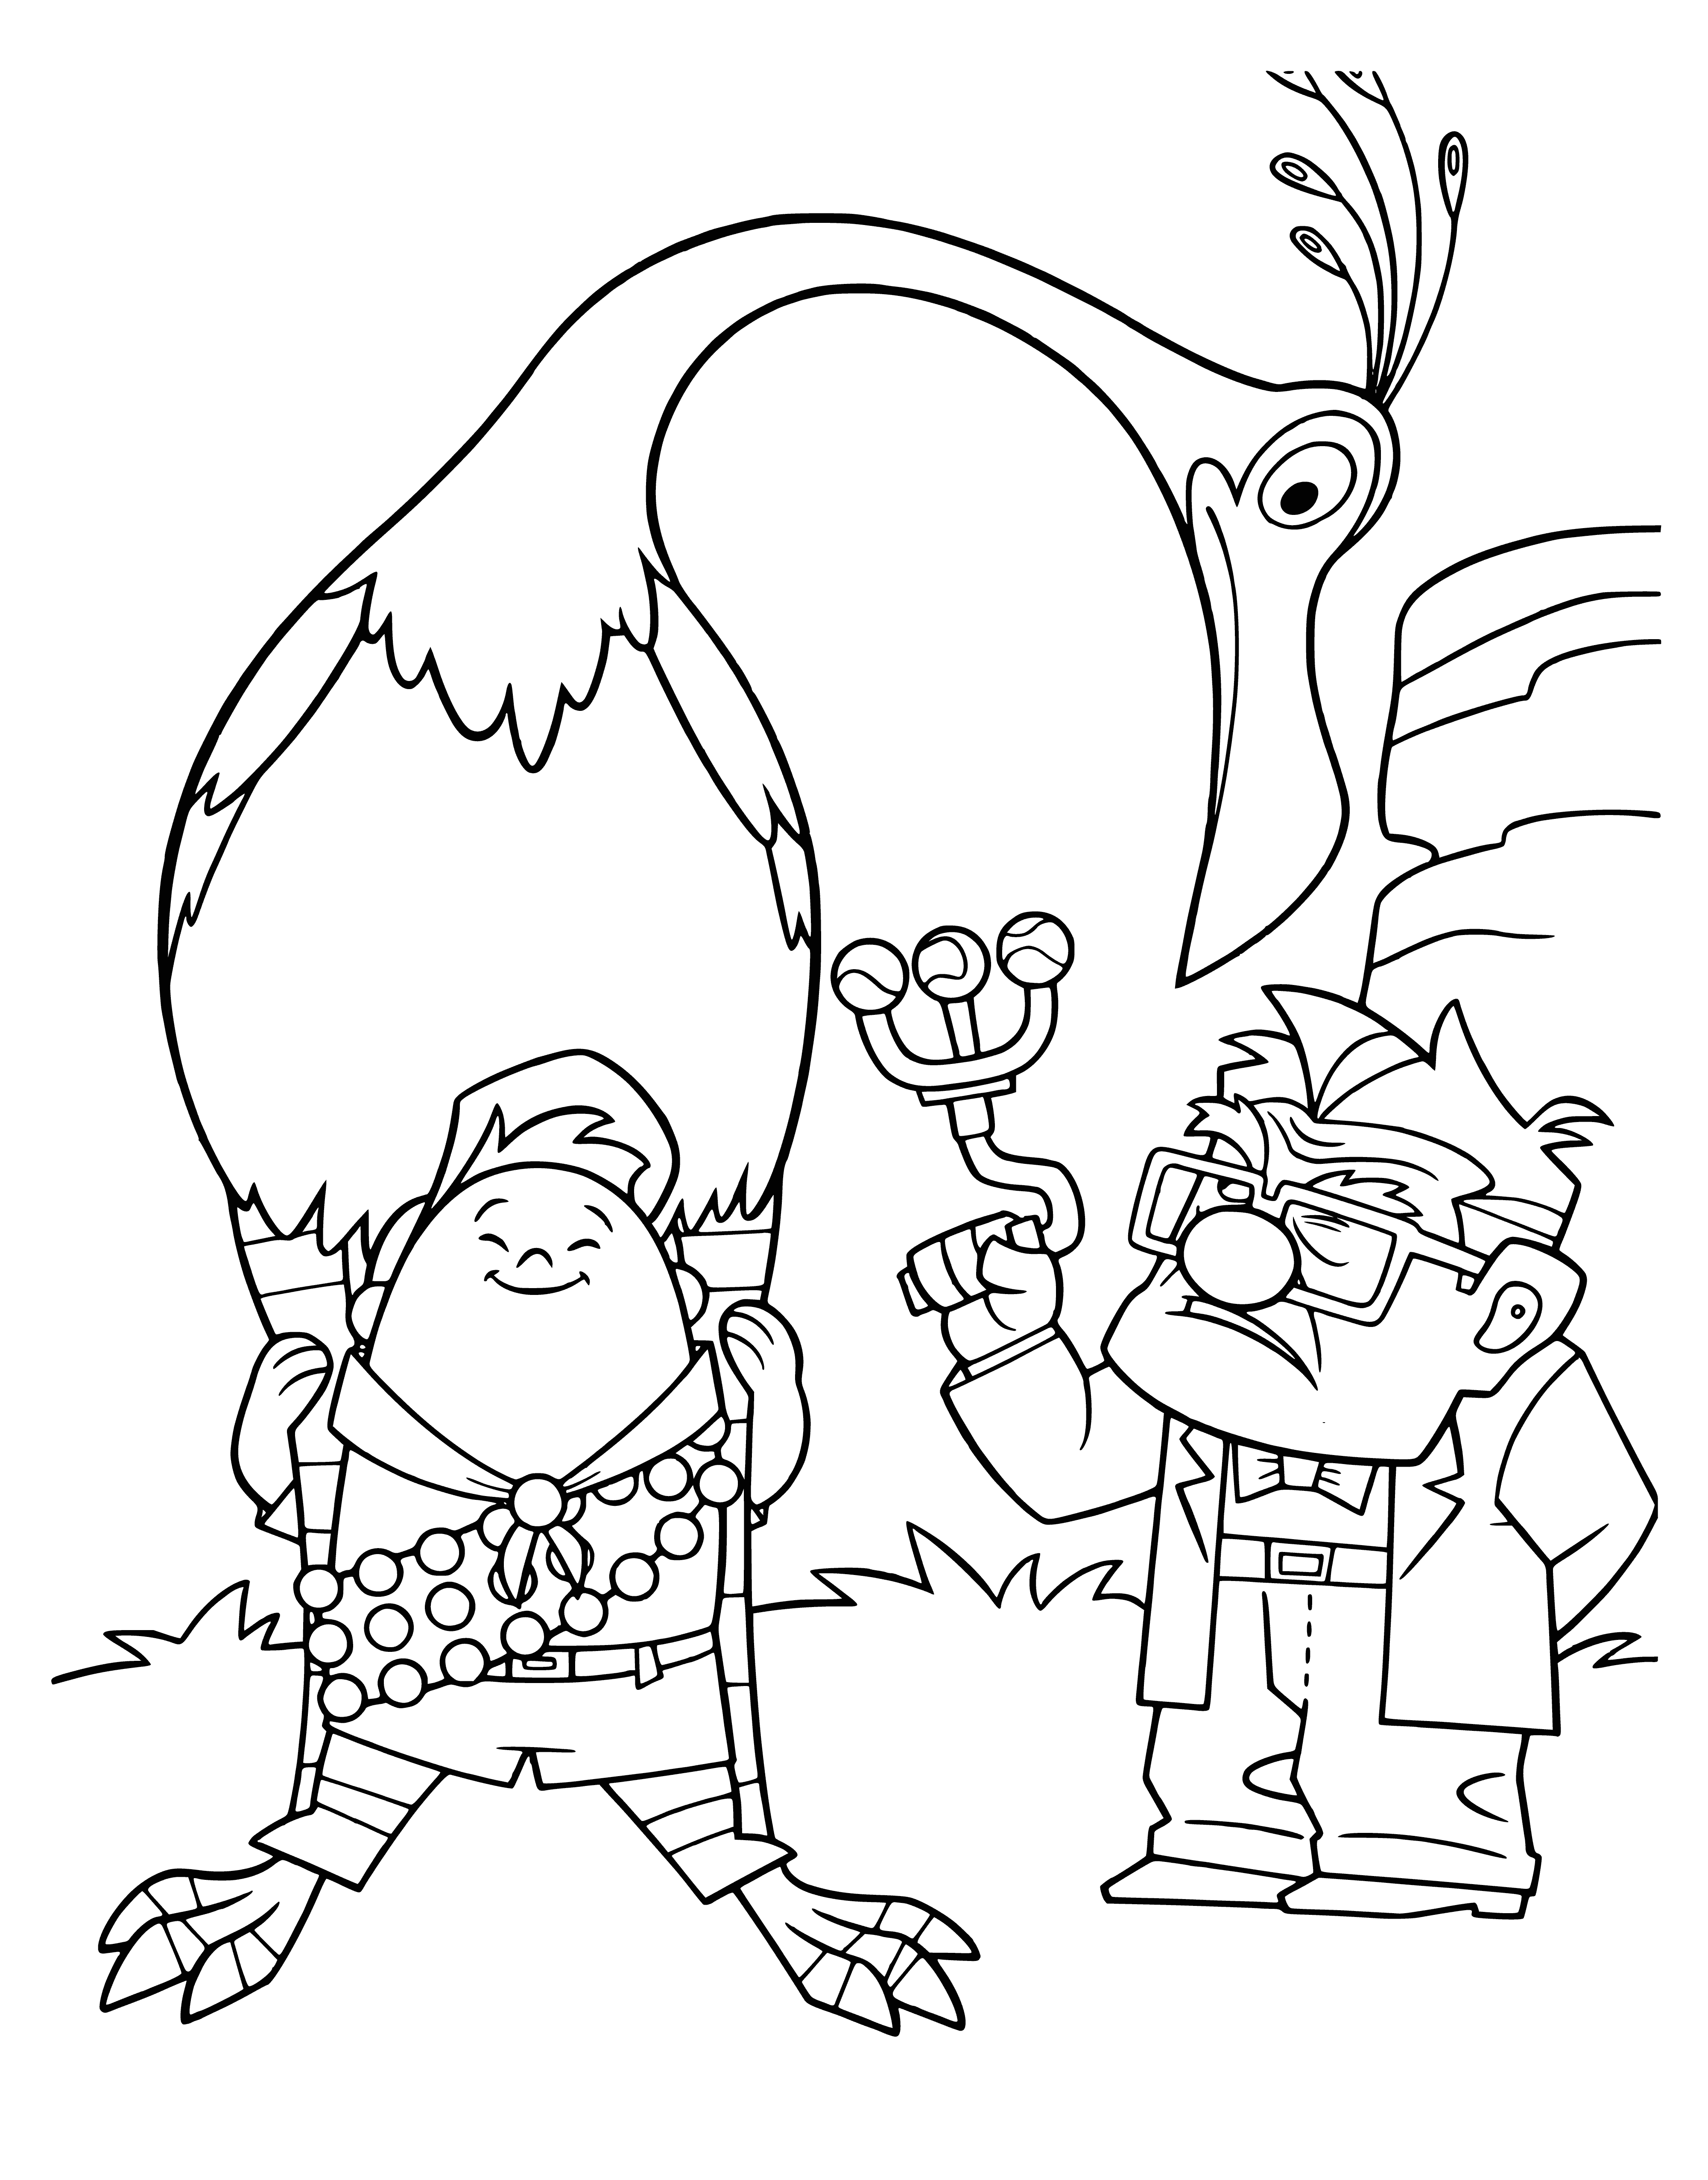 Karl is not happy coloring page